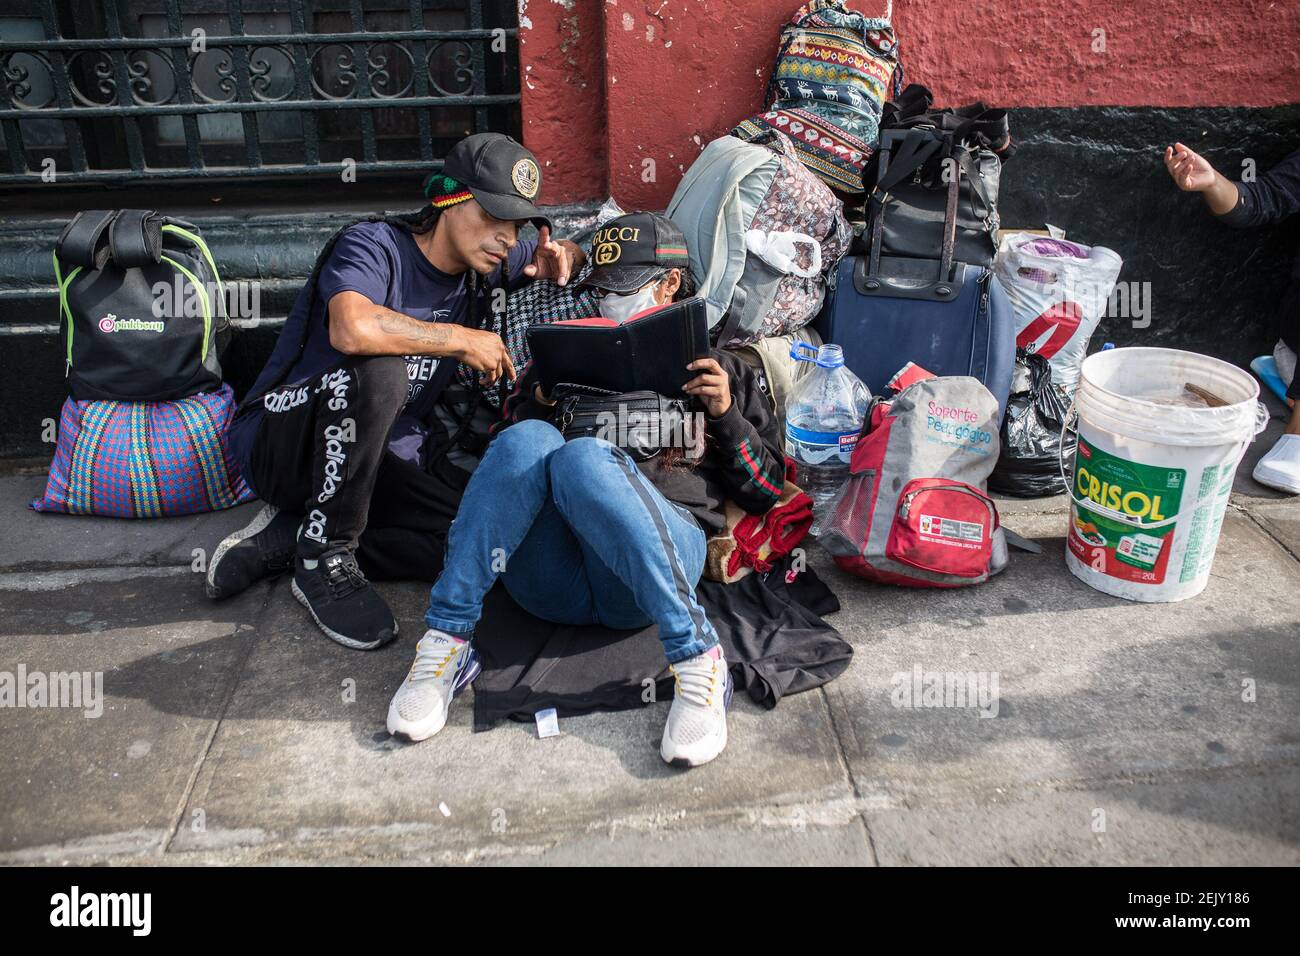 A young couple wait at the entrance of the bullring. The Acho bullfighting  ring in Lima has been settled to accommodate homeless and vulnerable people  during the Covid-19 quarantine. During morning hour's